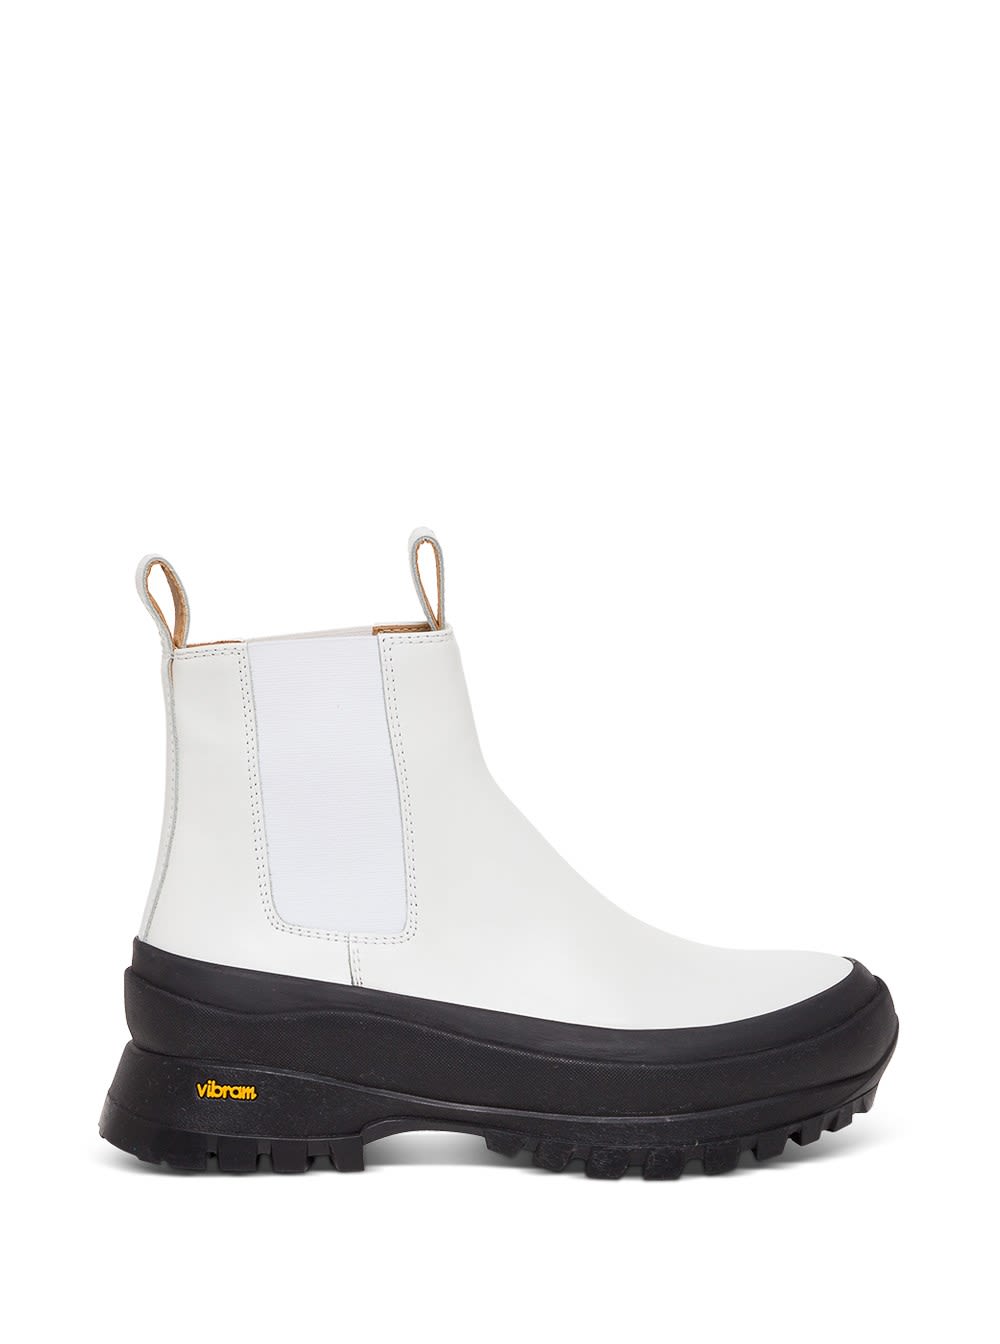 Jil Sander Boston Ankle Boots In Leather With Vibram Sole